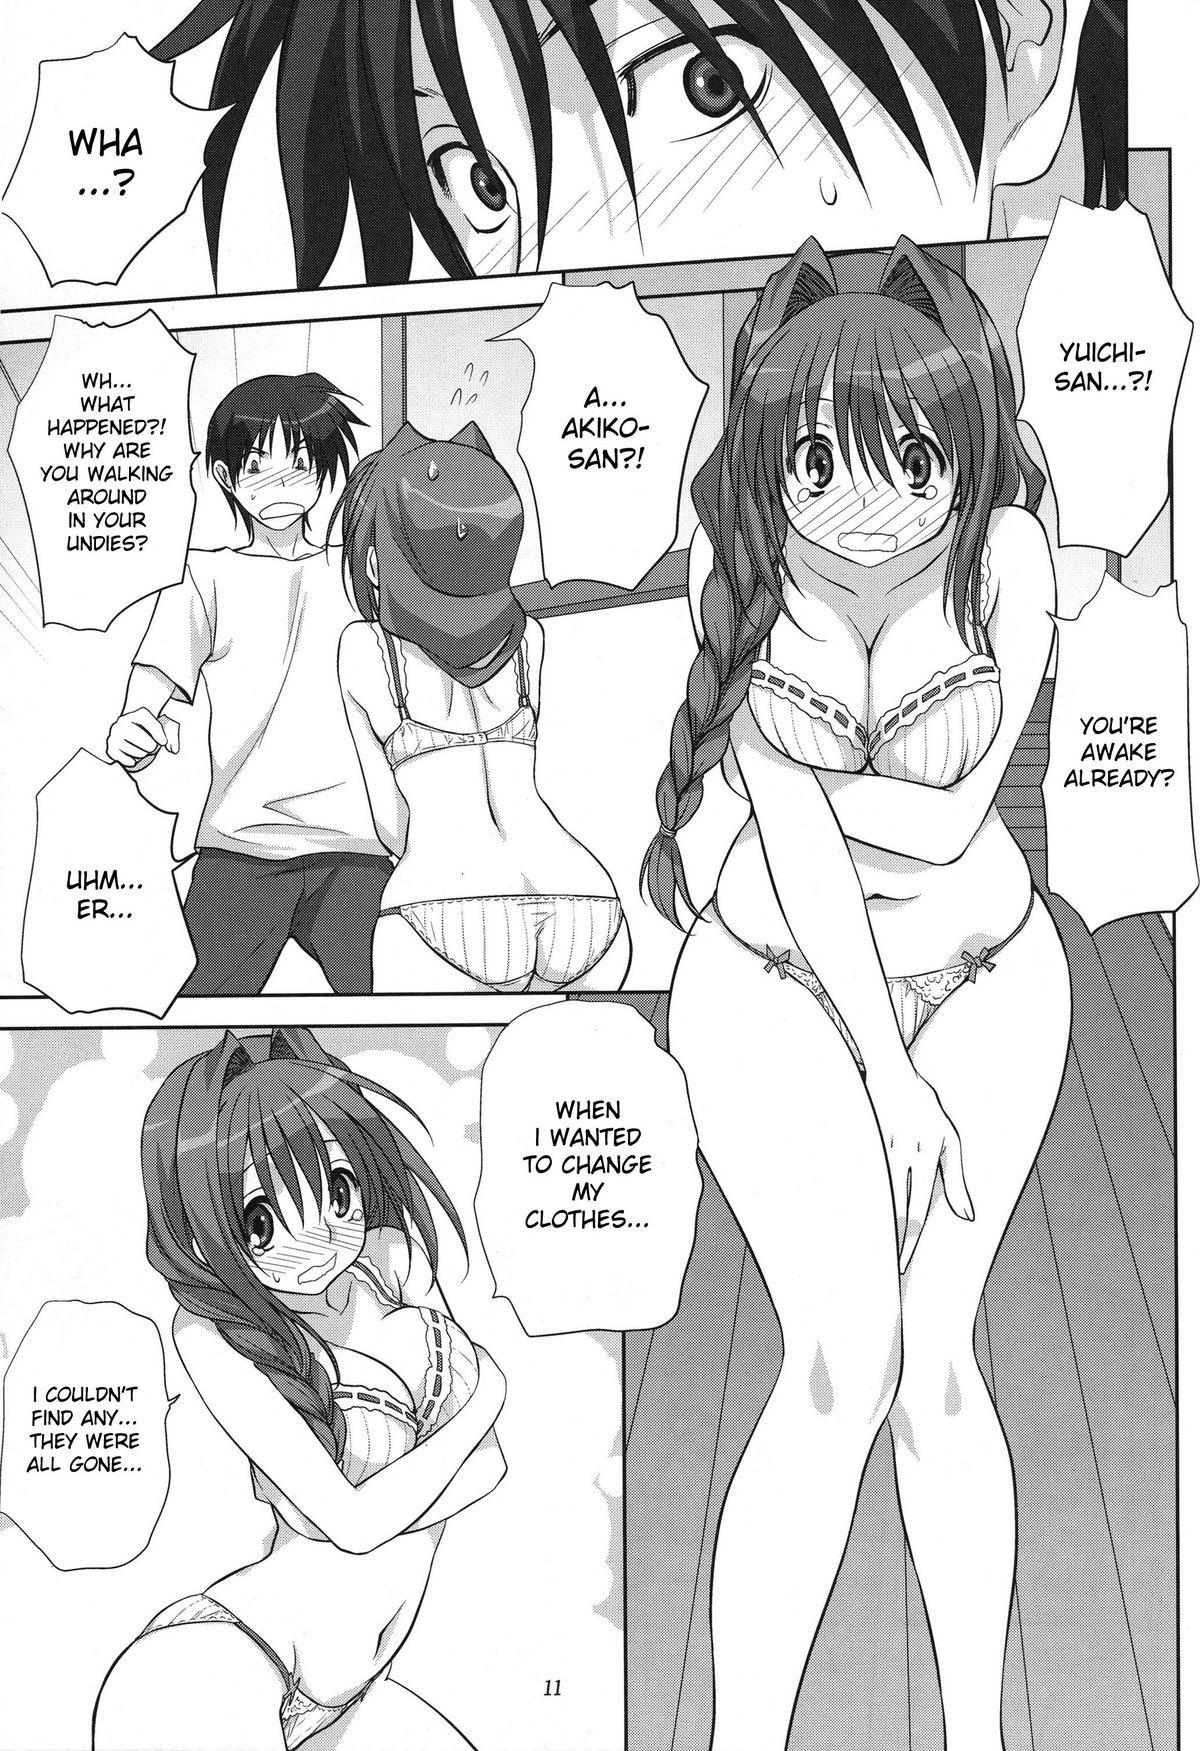 Public Nudity Akiko-san to Issho 6 - Kanon Hidden Cam - Page 11